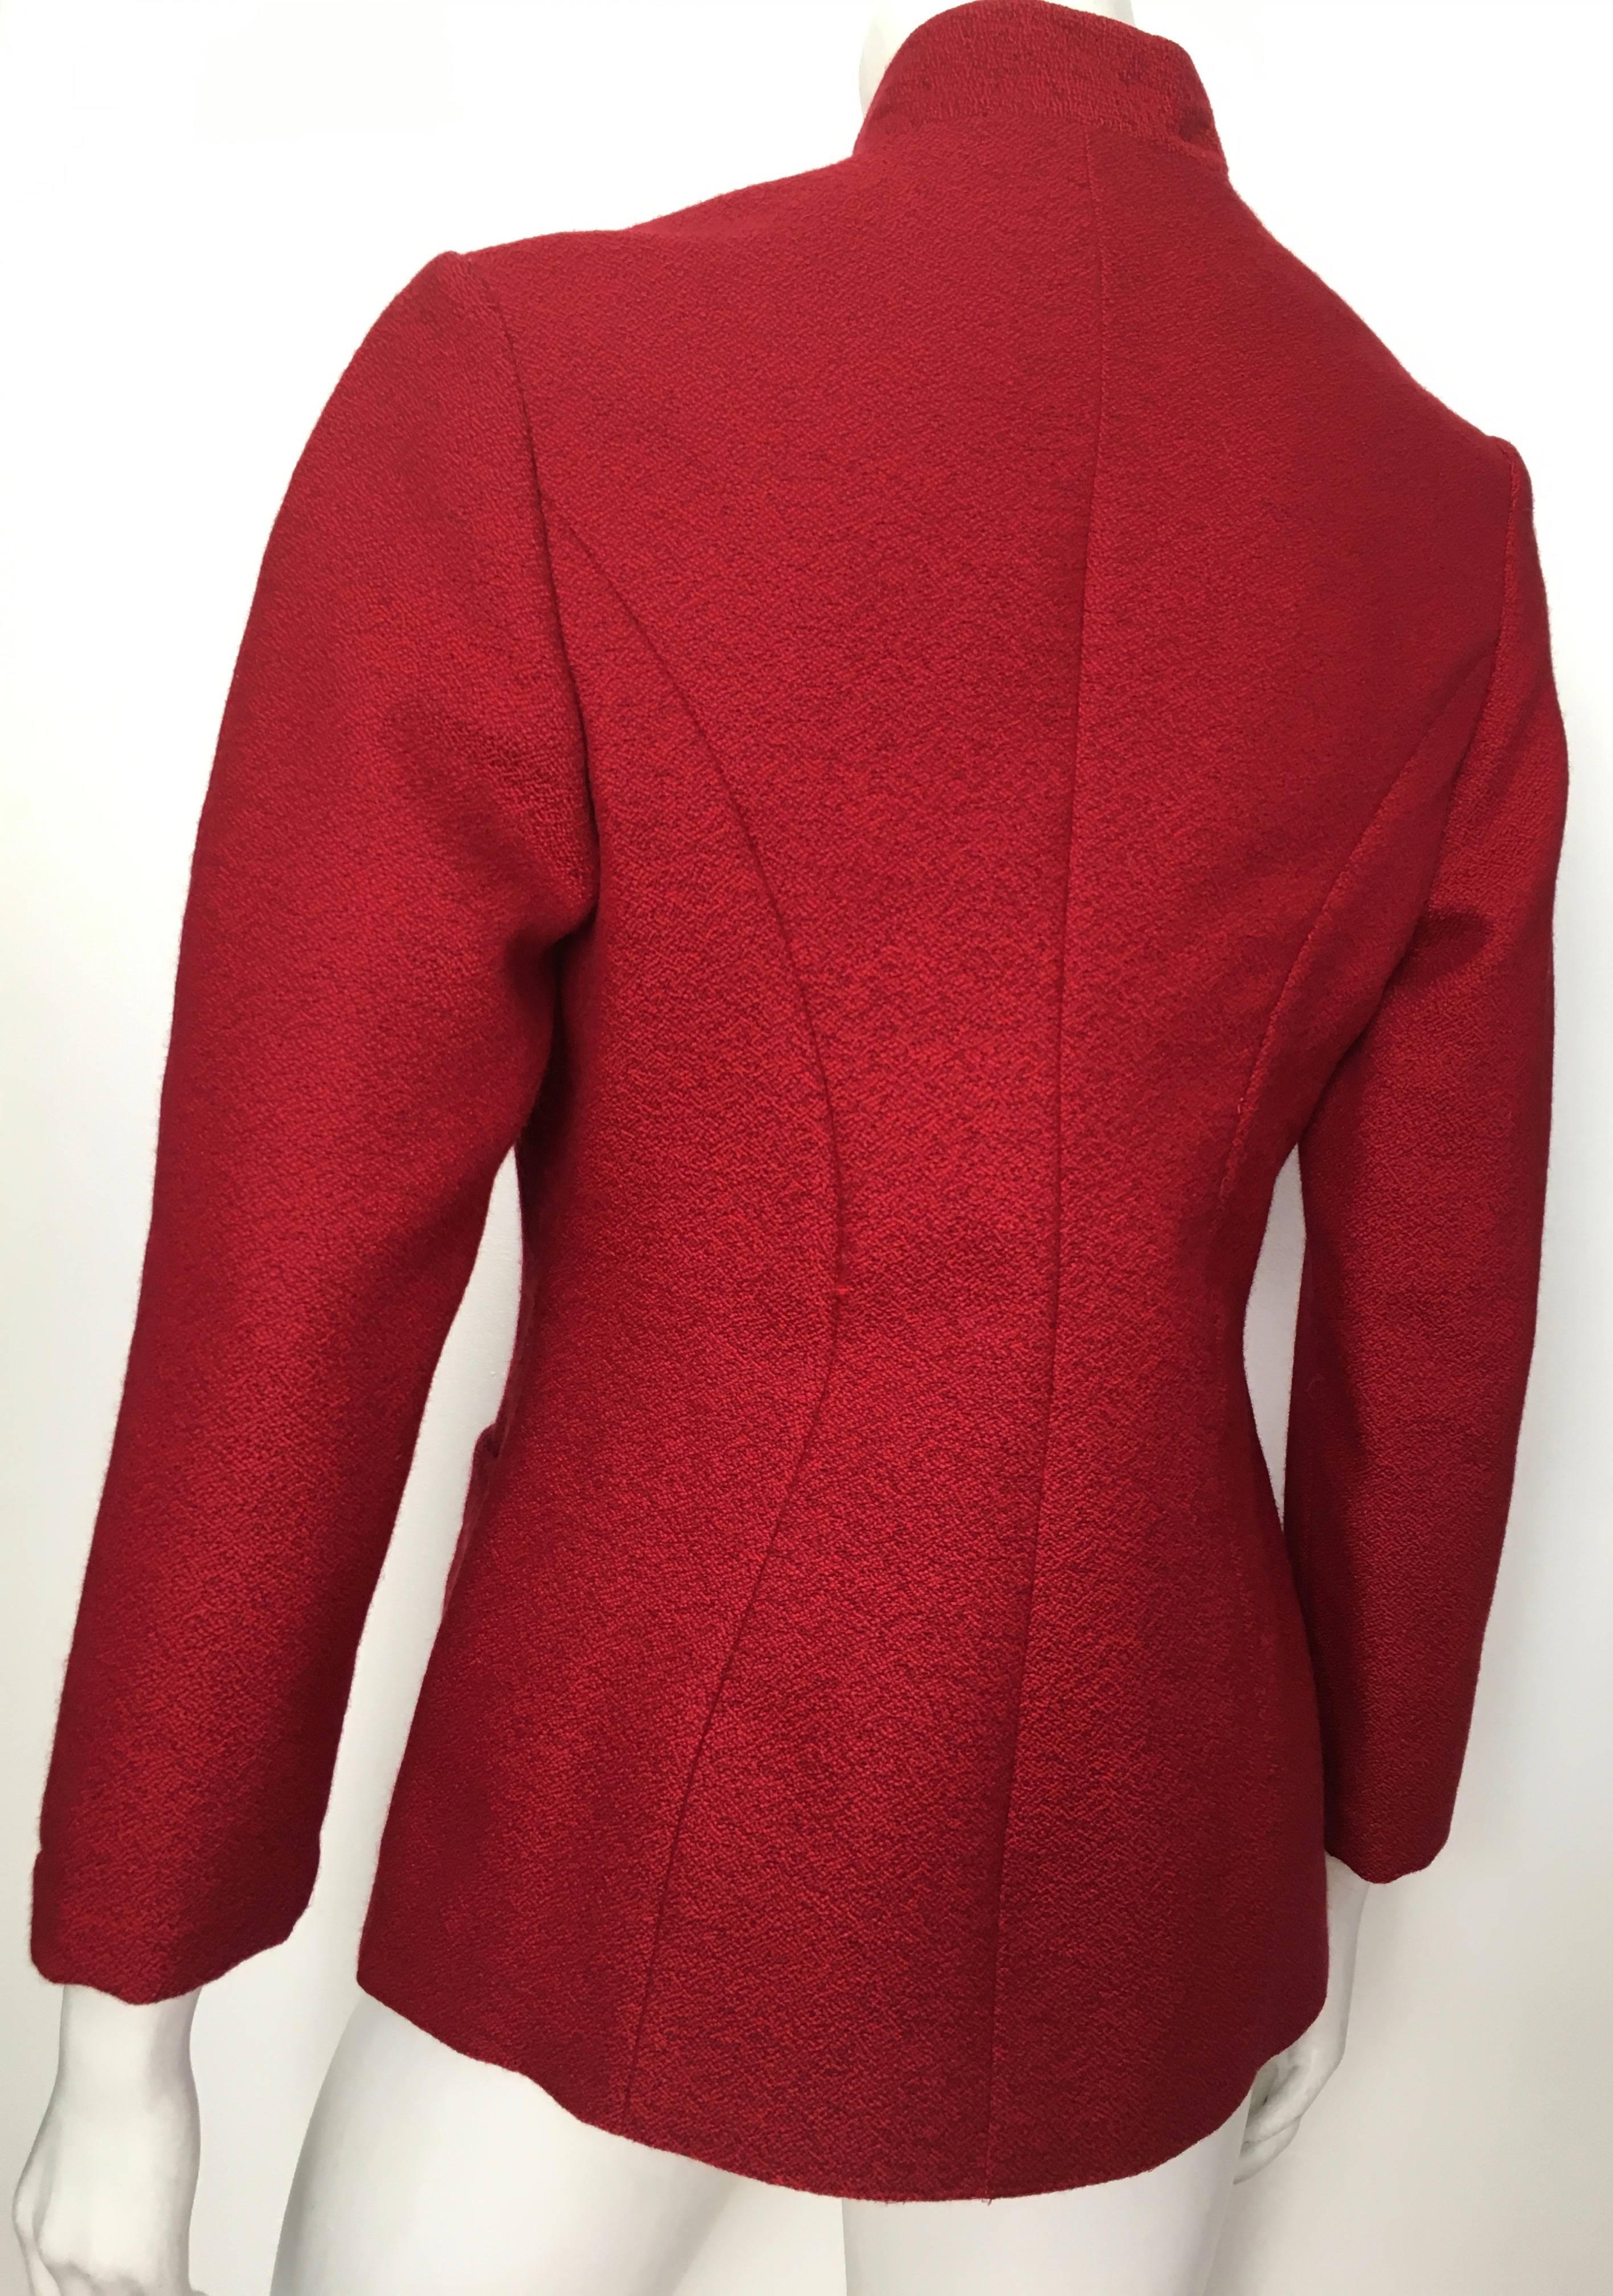 Thierry Mugler 1990s Red Wool Sculptural Jacket Size 8.  For Sale 1